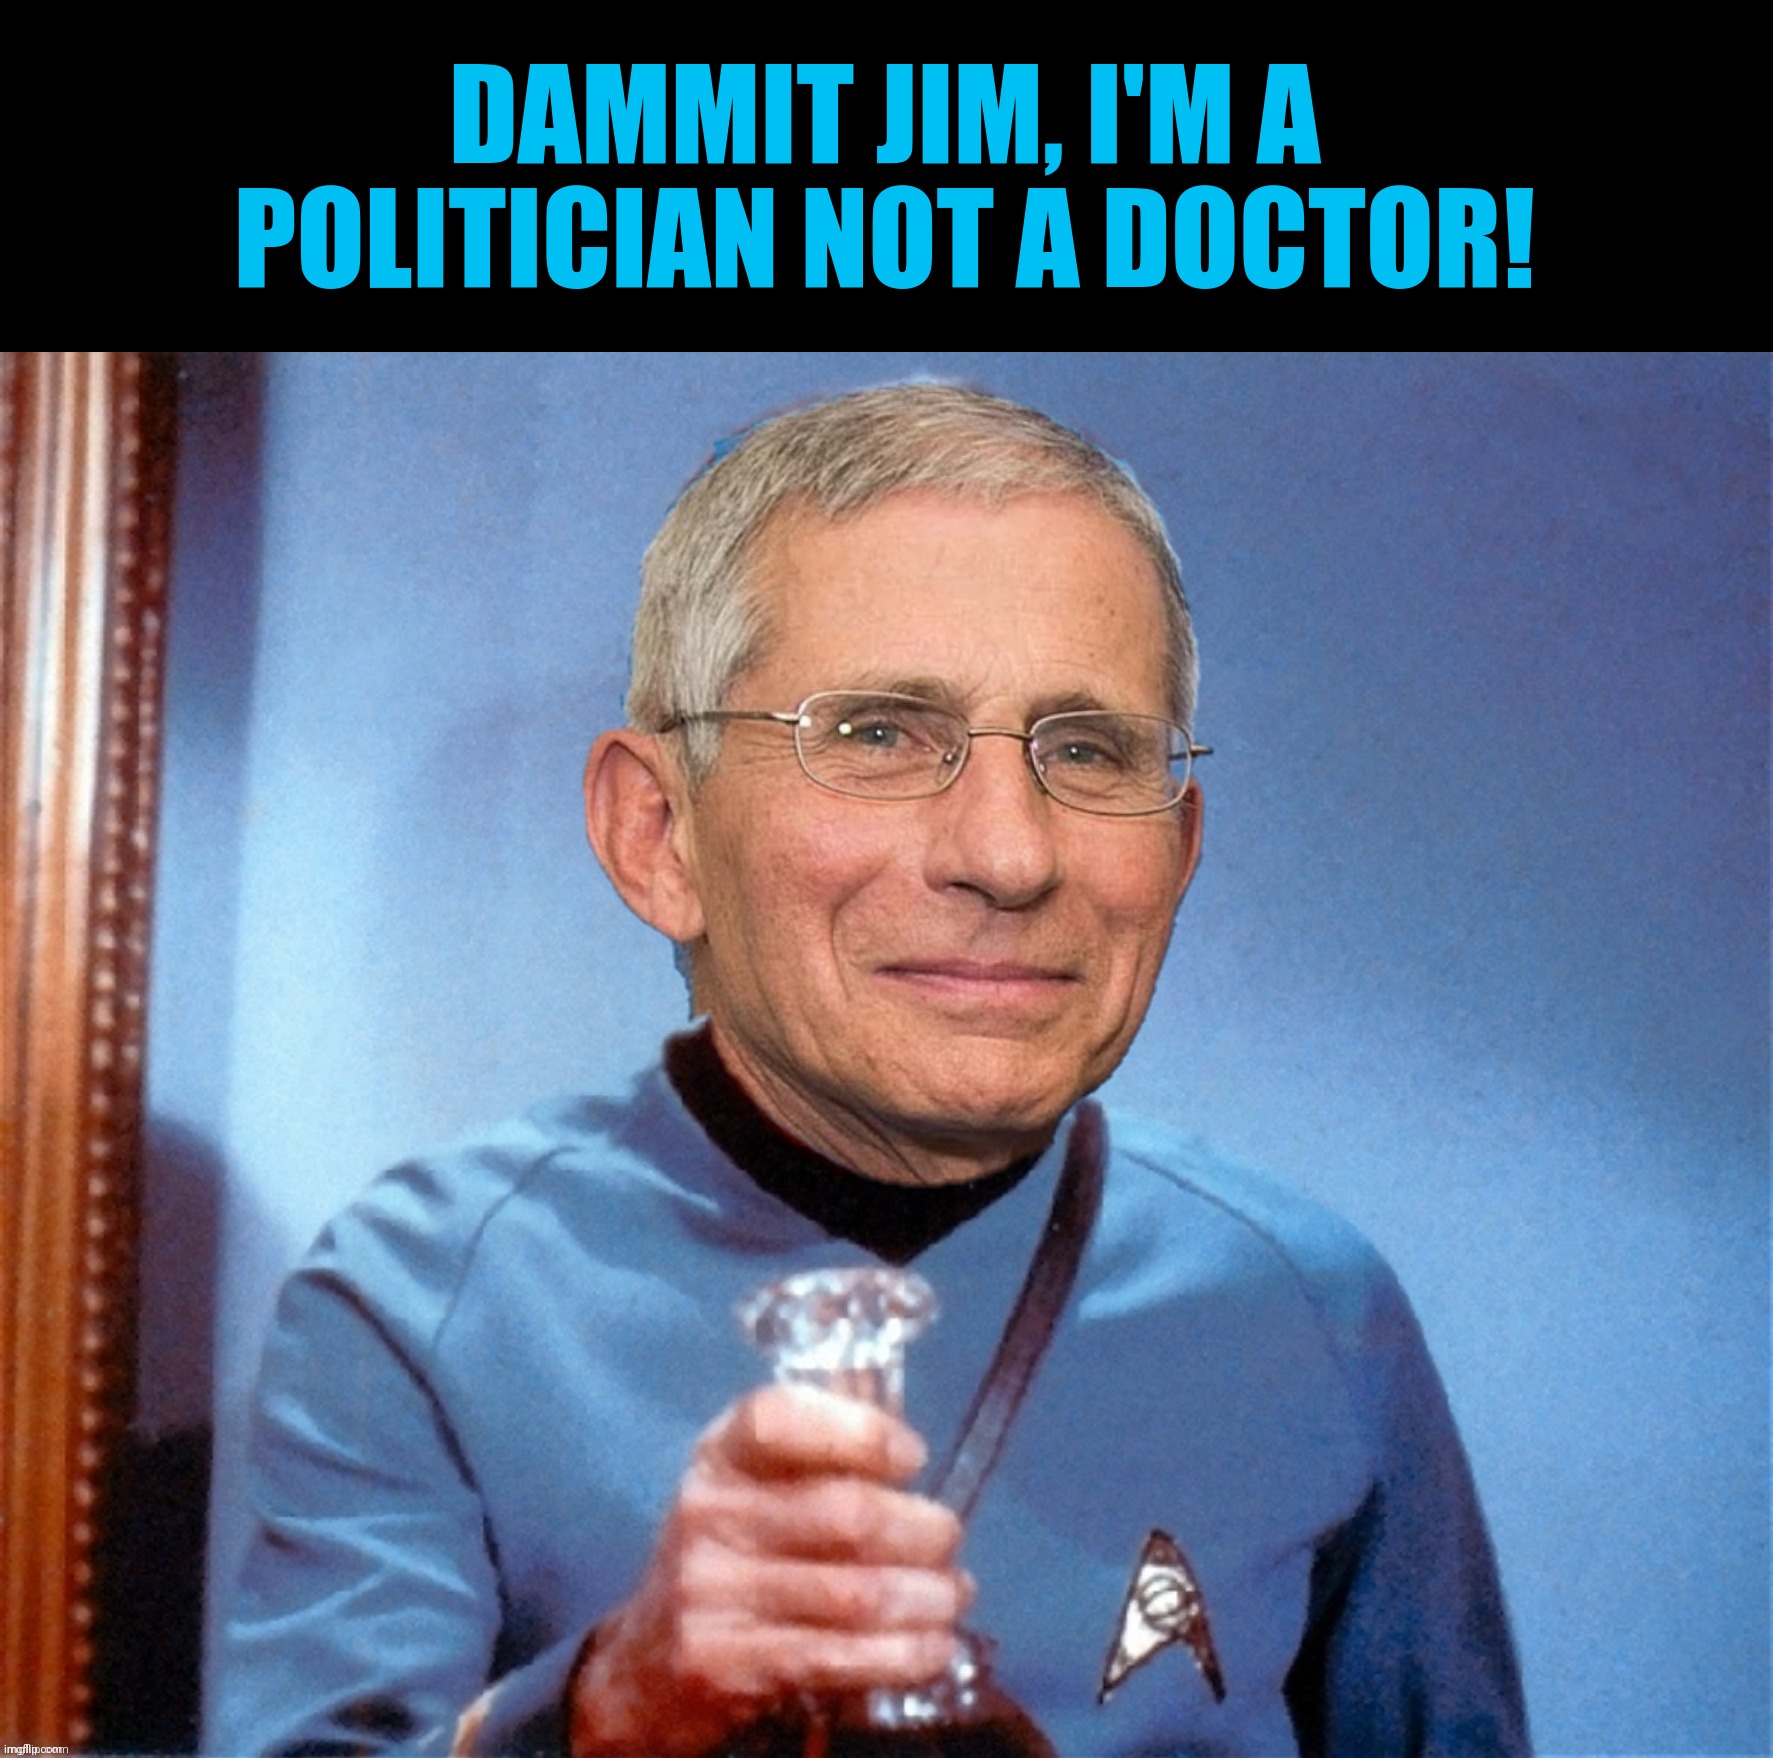 DAMMIT JIM, I'M A POLITICIAN NOT A DOCTOR! | made w/ Imgflip meme maker